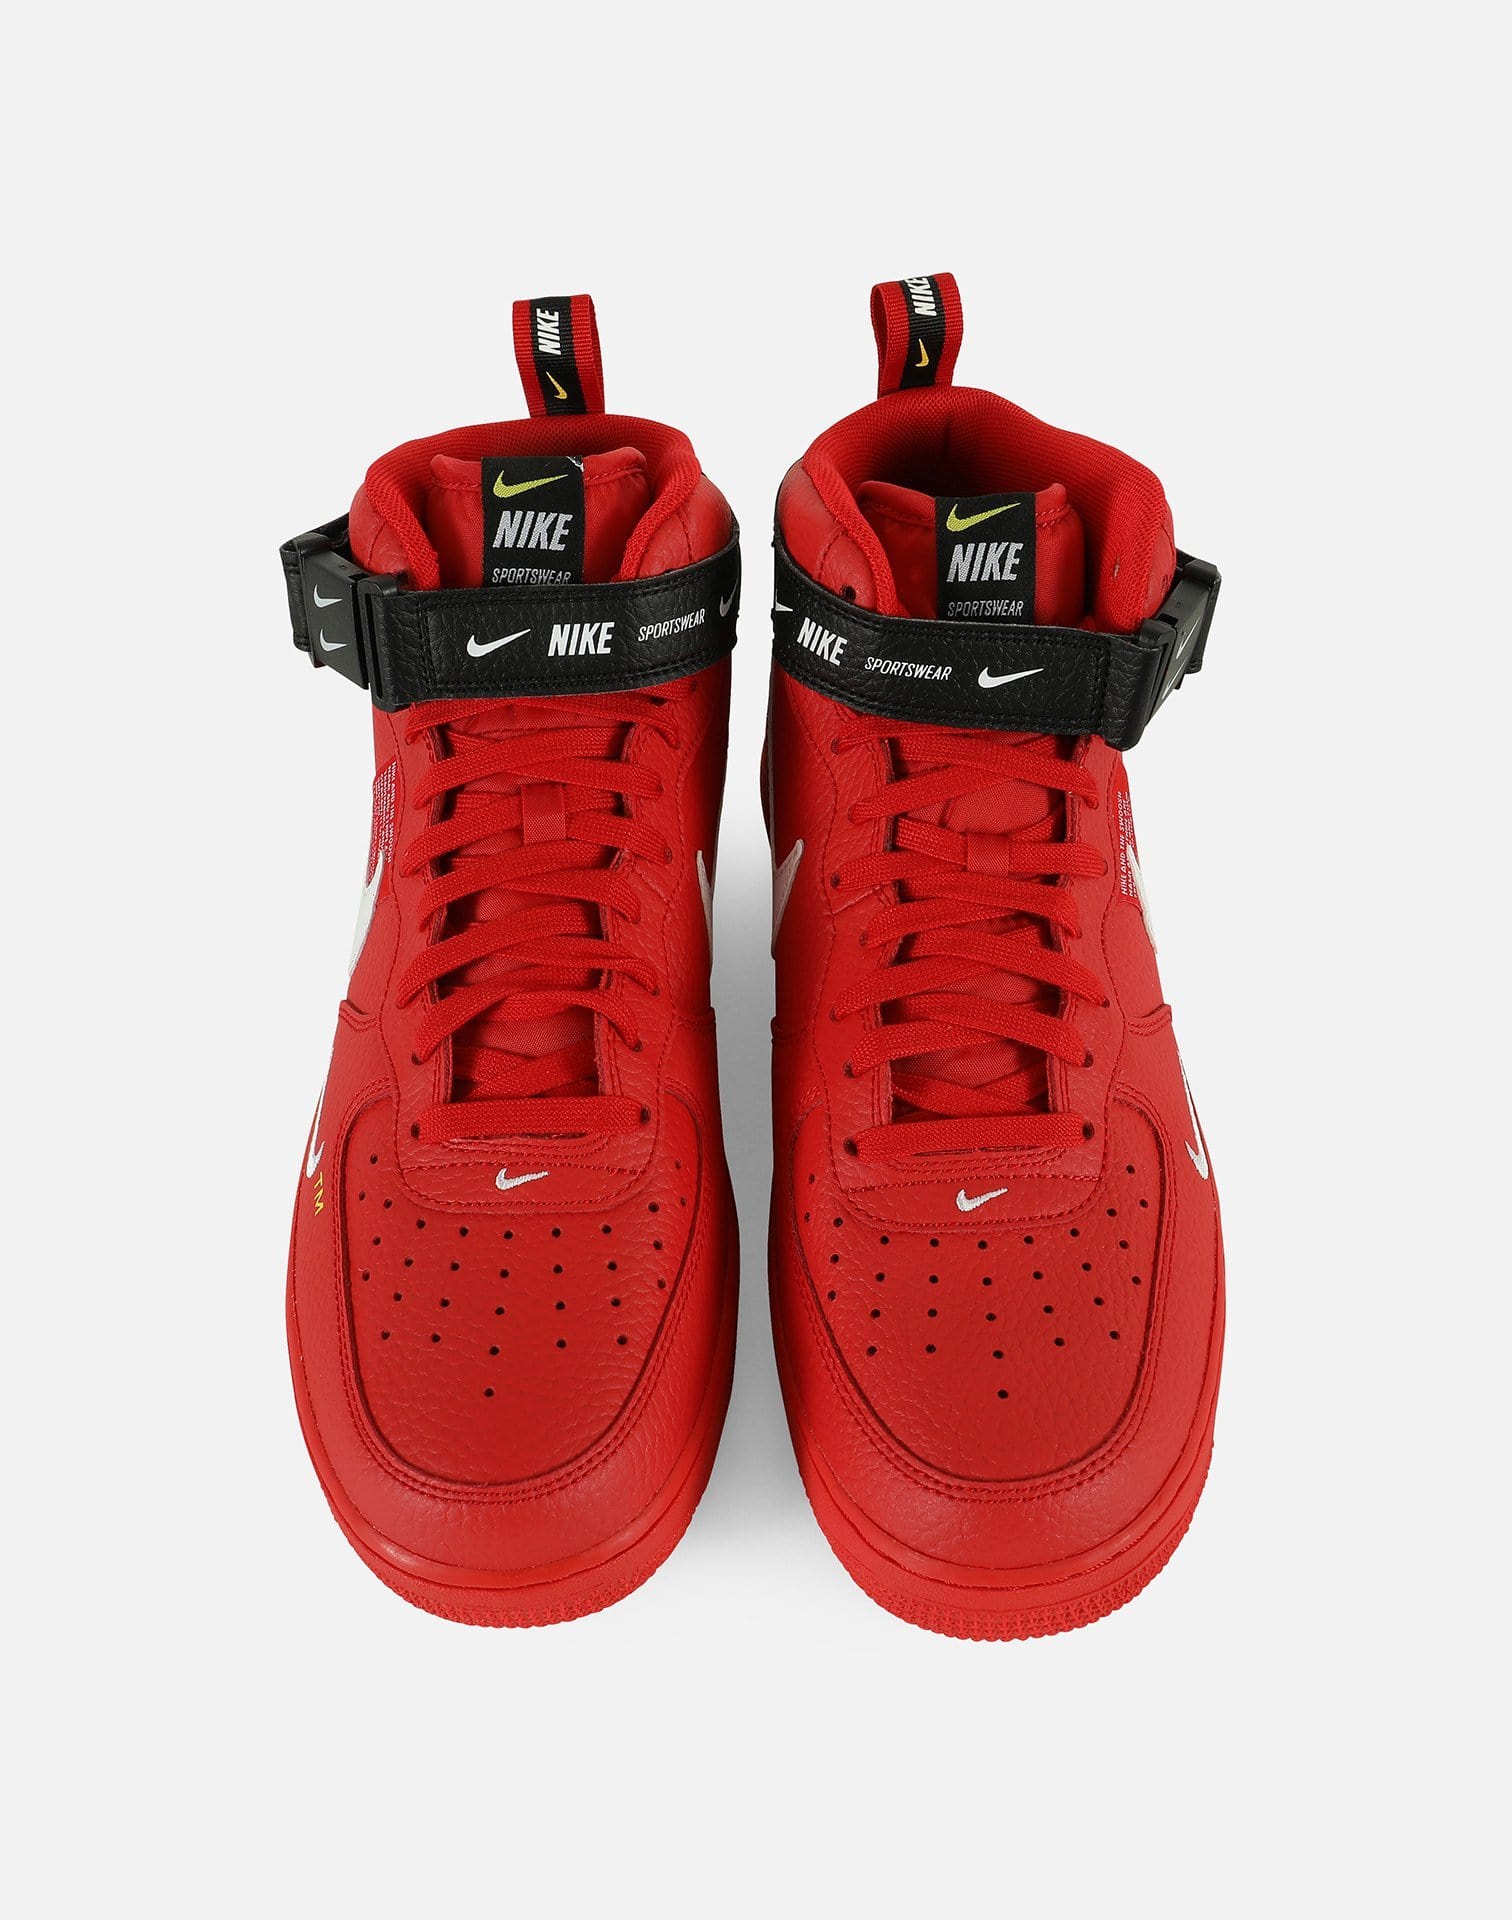 First Look: Nike Air Force 1 Mid '07 LV8 Utility – Red